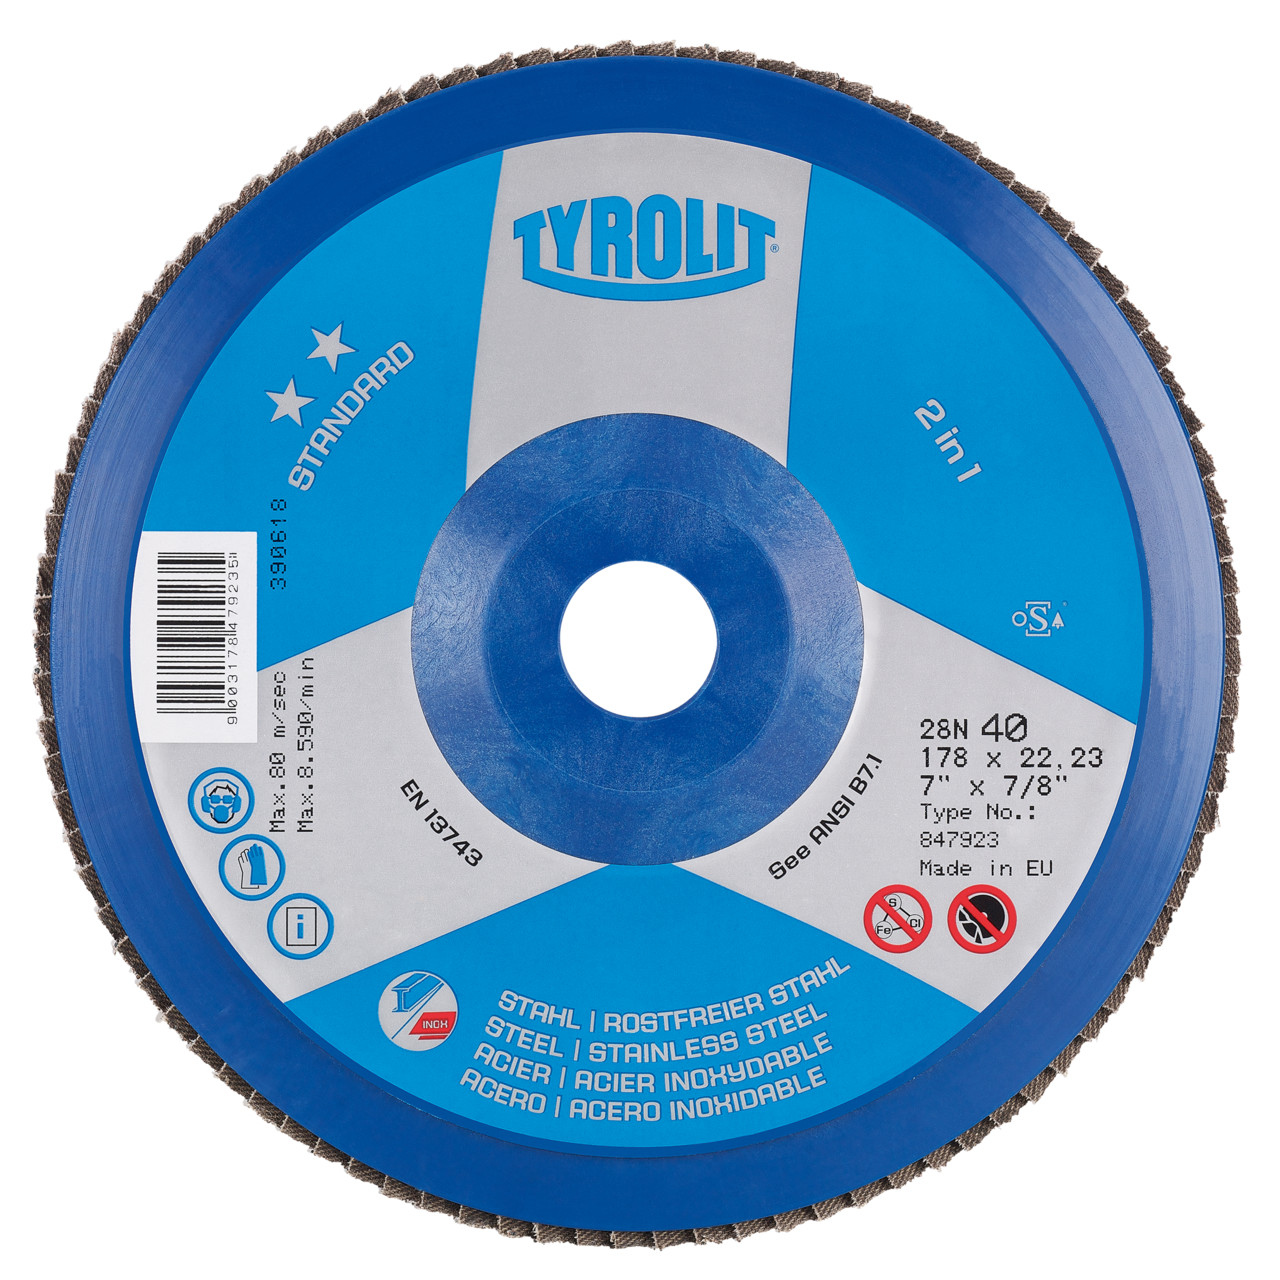 Tyrolit Serrated lock washer DxH 115x22.2 2in1 for steel and stainless steel, P80, shape: 28N - straight version (plastic carrier body), Art. 847927